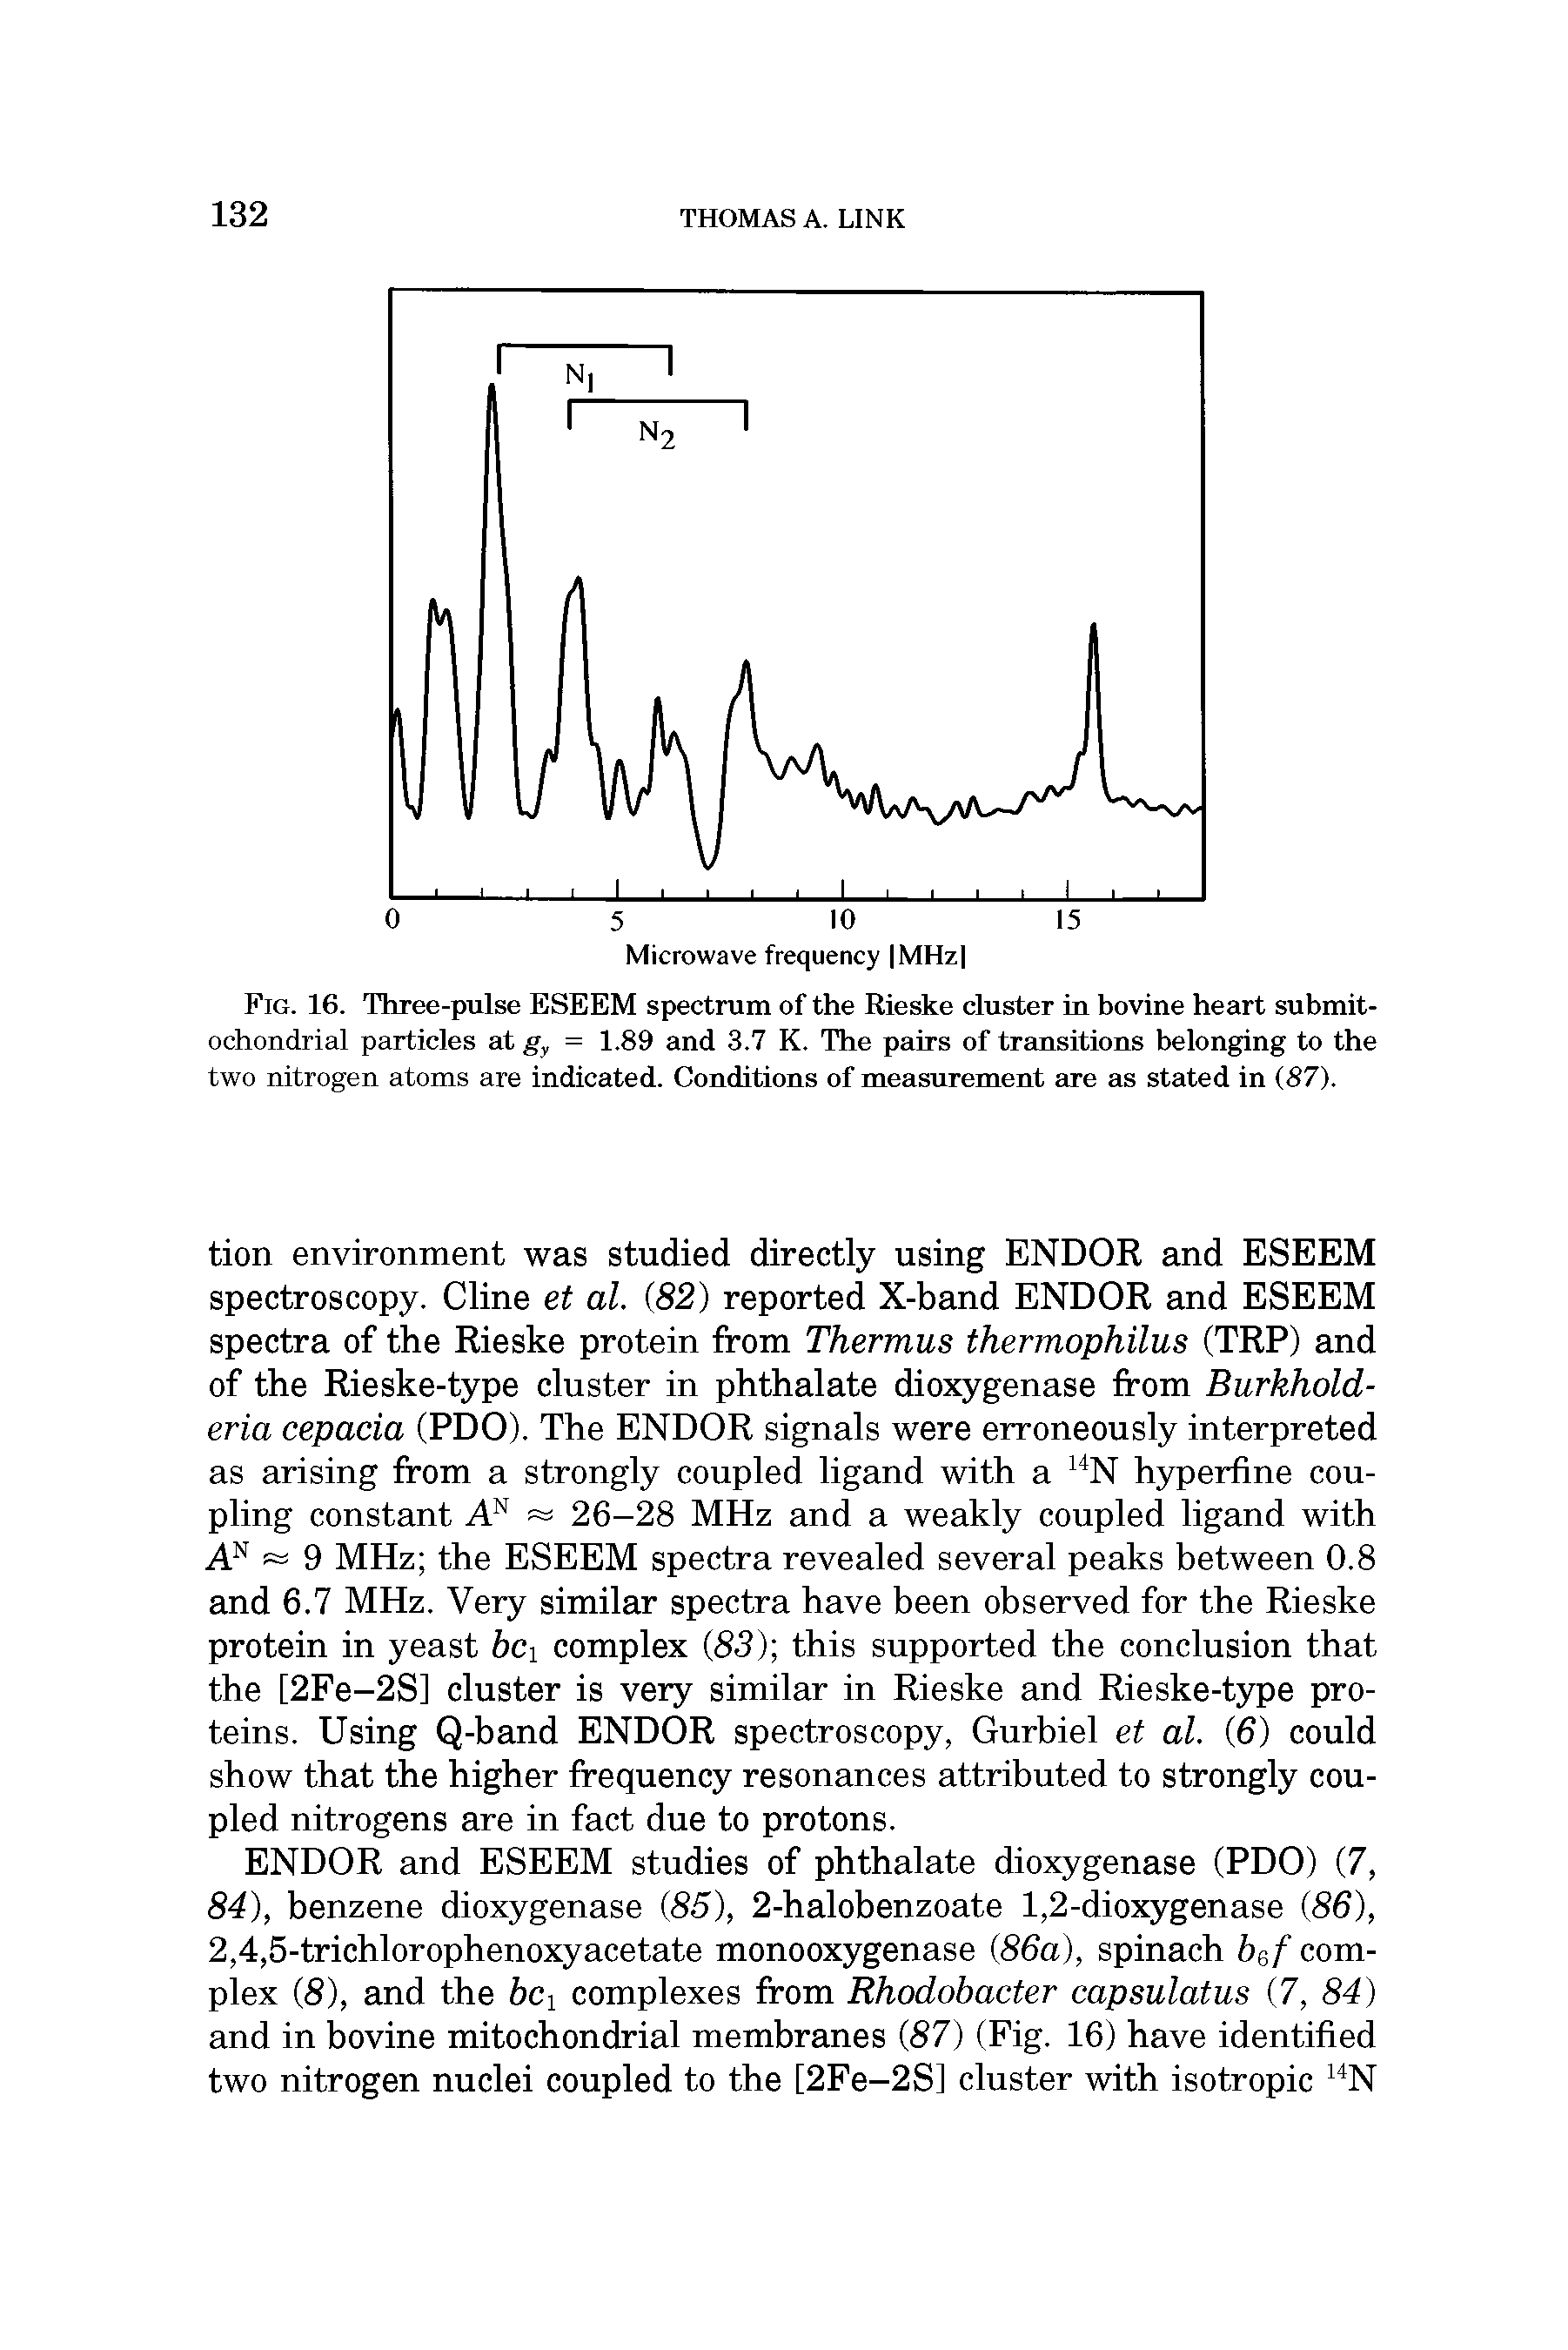 Fig. 16. Three-pulse ESEEM spectrum of the Rieske cluster in hovine heart submit-ochondrial particles at gy = 1.89 and 3.7 K. The pairs of trEmsitions belonging to the two nitrogen atoms are indicated. Conditions of measurement EU-e as stated in (87).